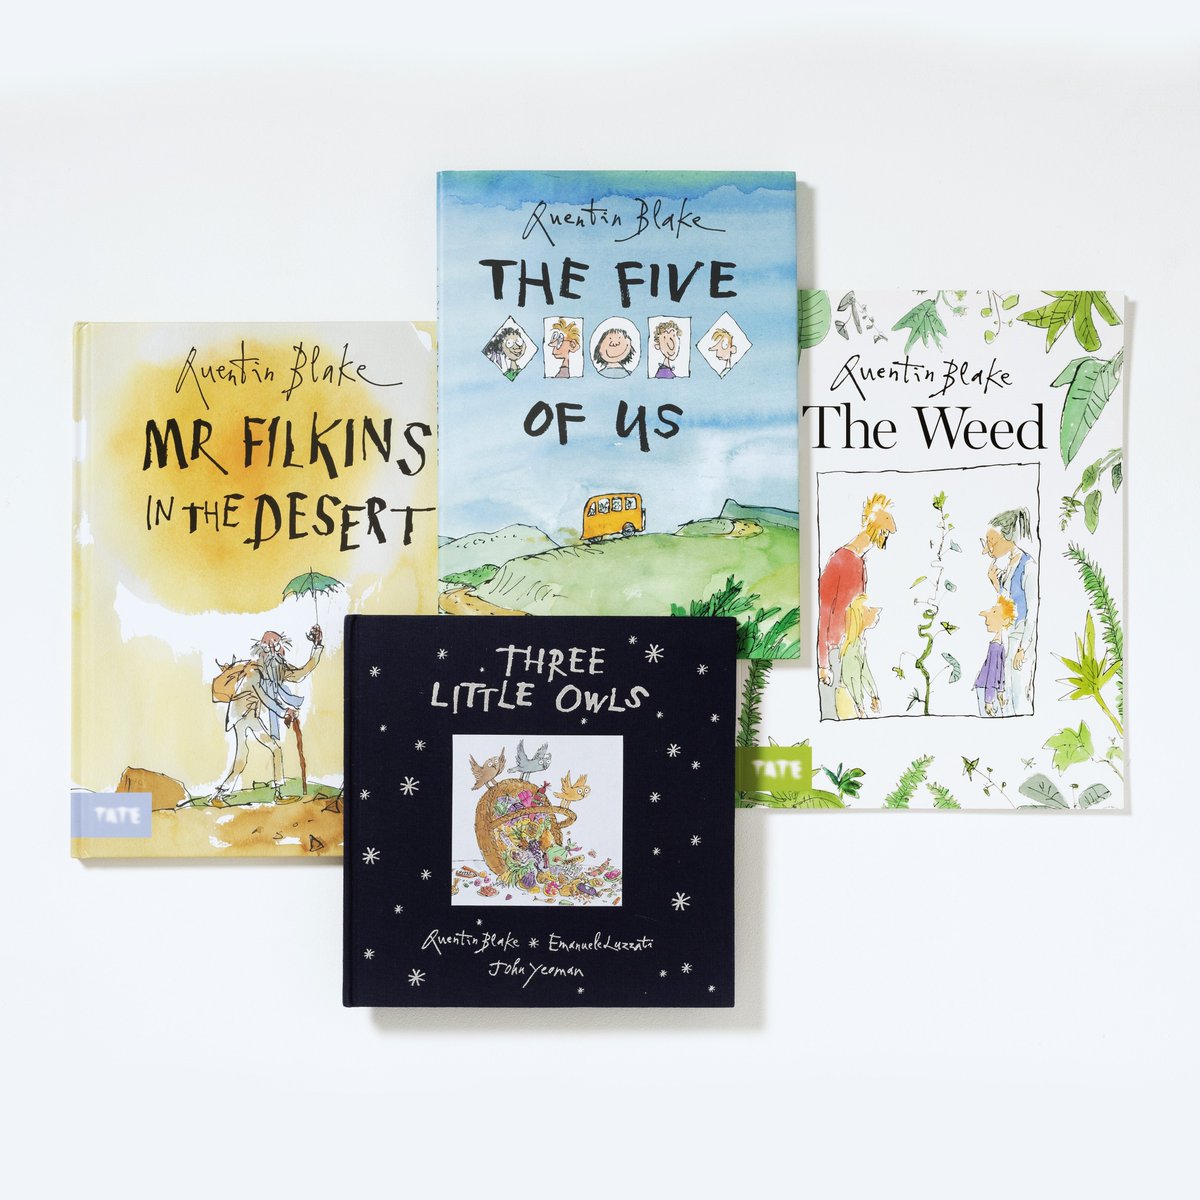 Happy birthday to #QuentinBlake! 🎈 🧡 Today we are celebrating his heart-warming stories and iconic illustrations in our beloved titles. ✨ Beautifully bright, sometimes sparkly and always a unique story - these would make the perfect gift for a little one this time of year!